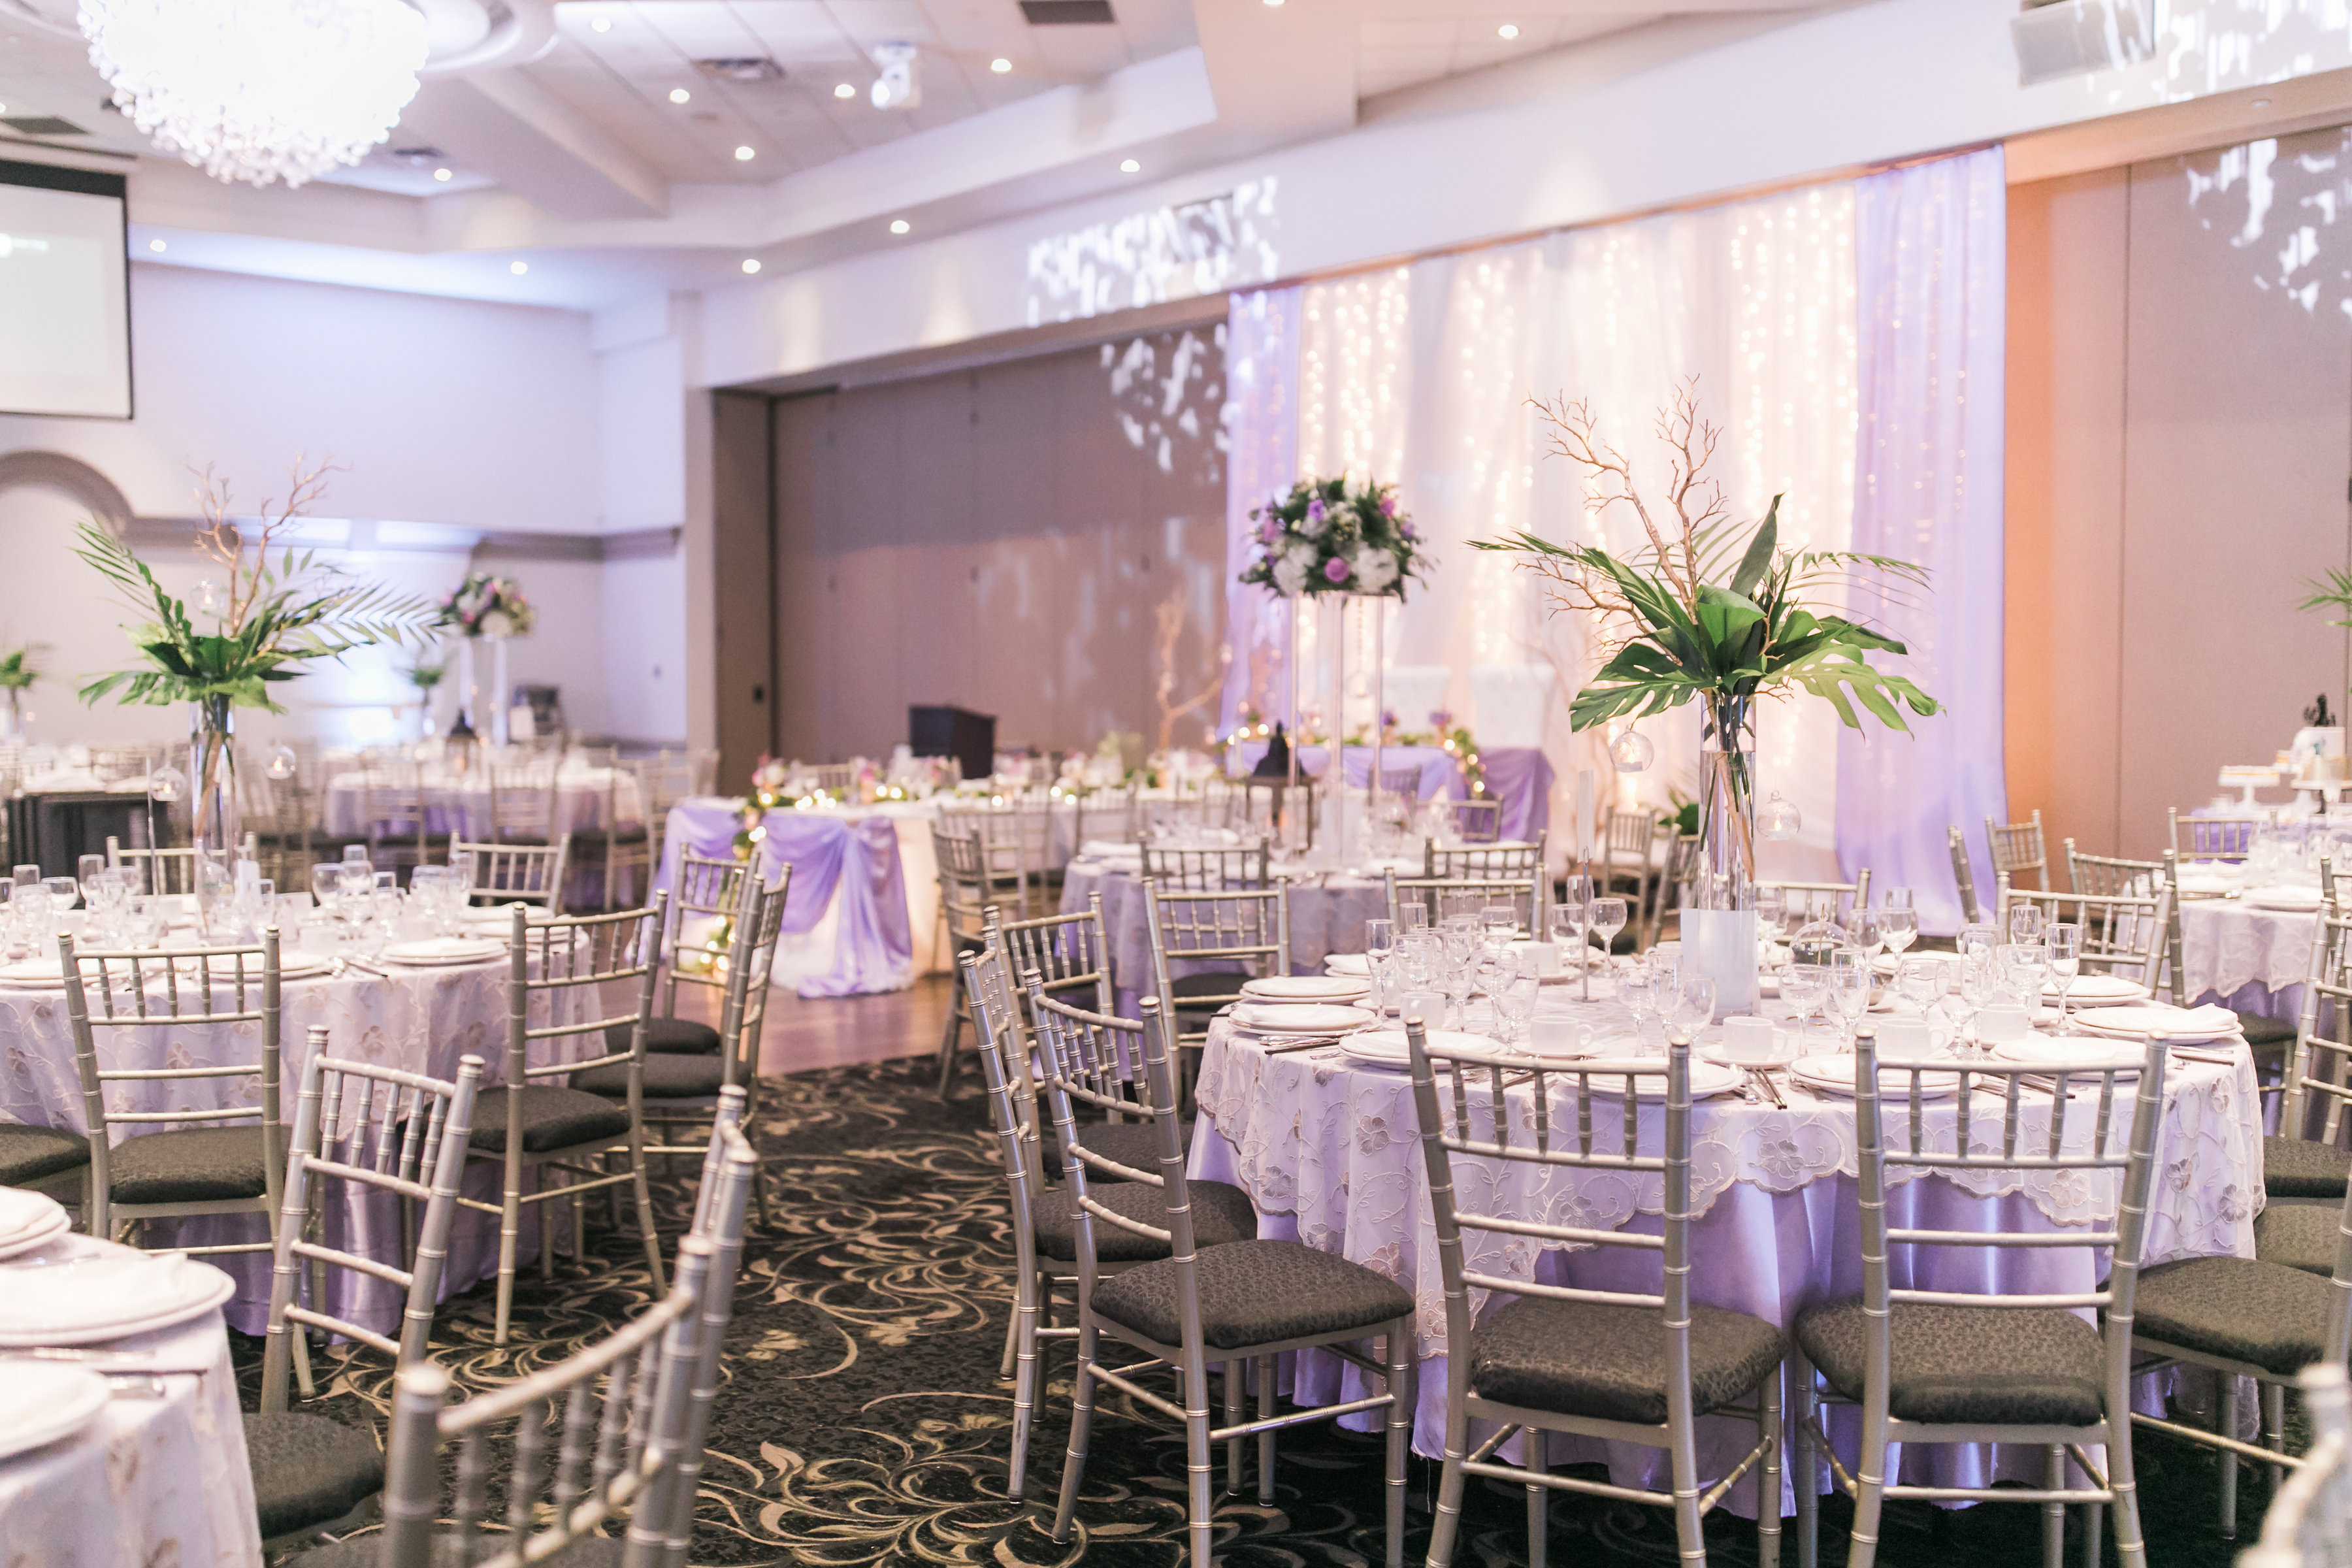 Wedding reception at Fontana Primavera, with tall centrepieces, purple tablecloths, and gold overlay linens. Toronto wedding flowers and decor by Secrets Floral.